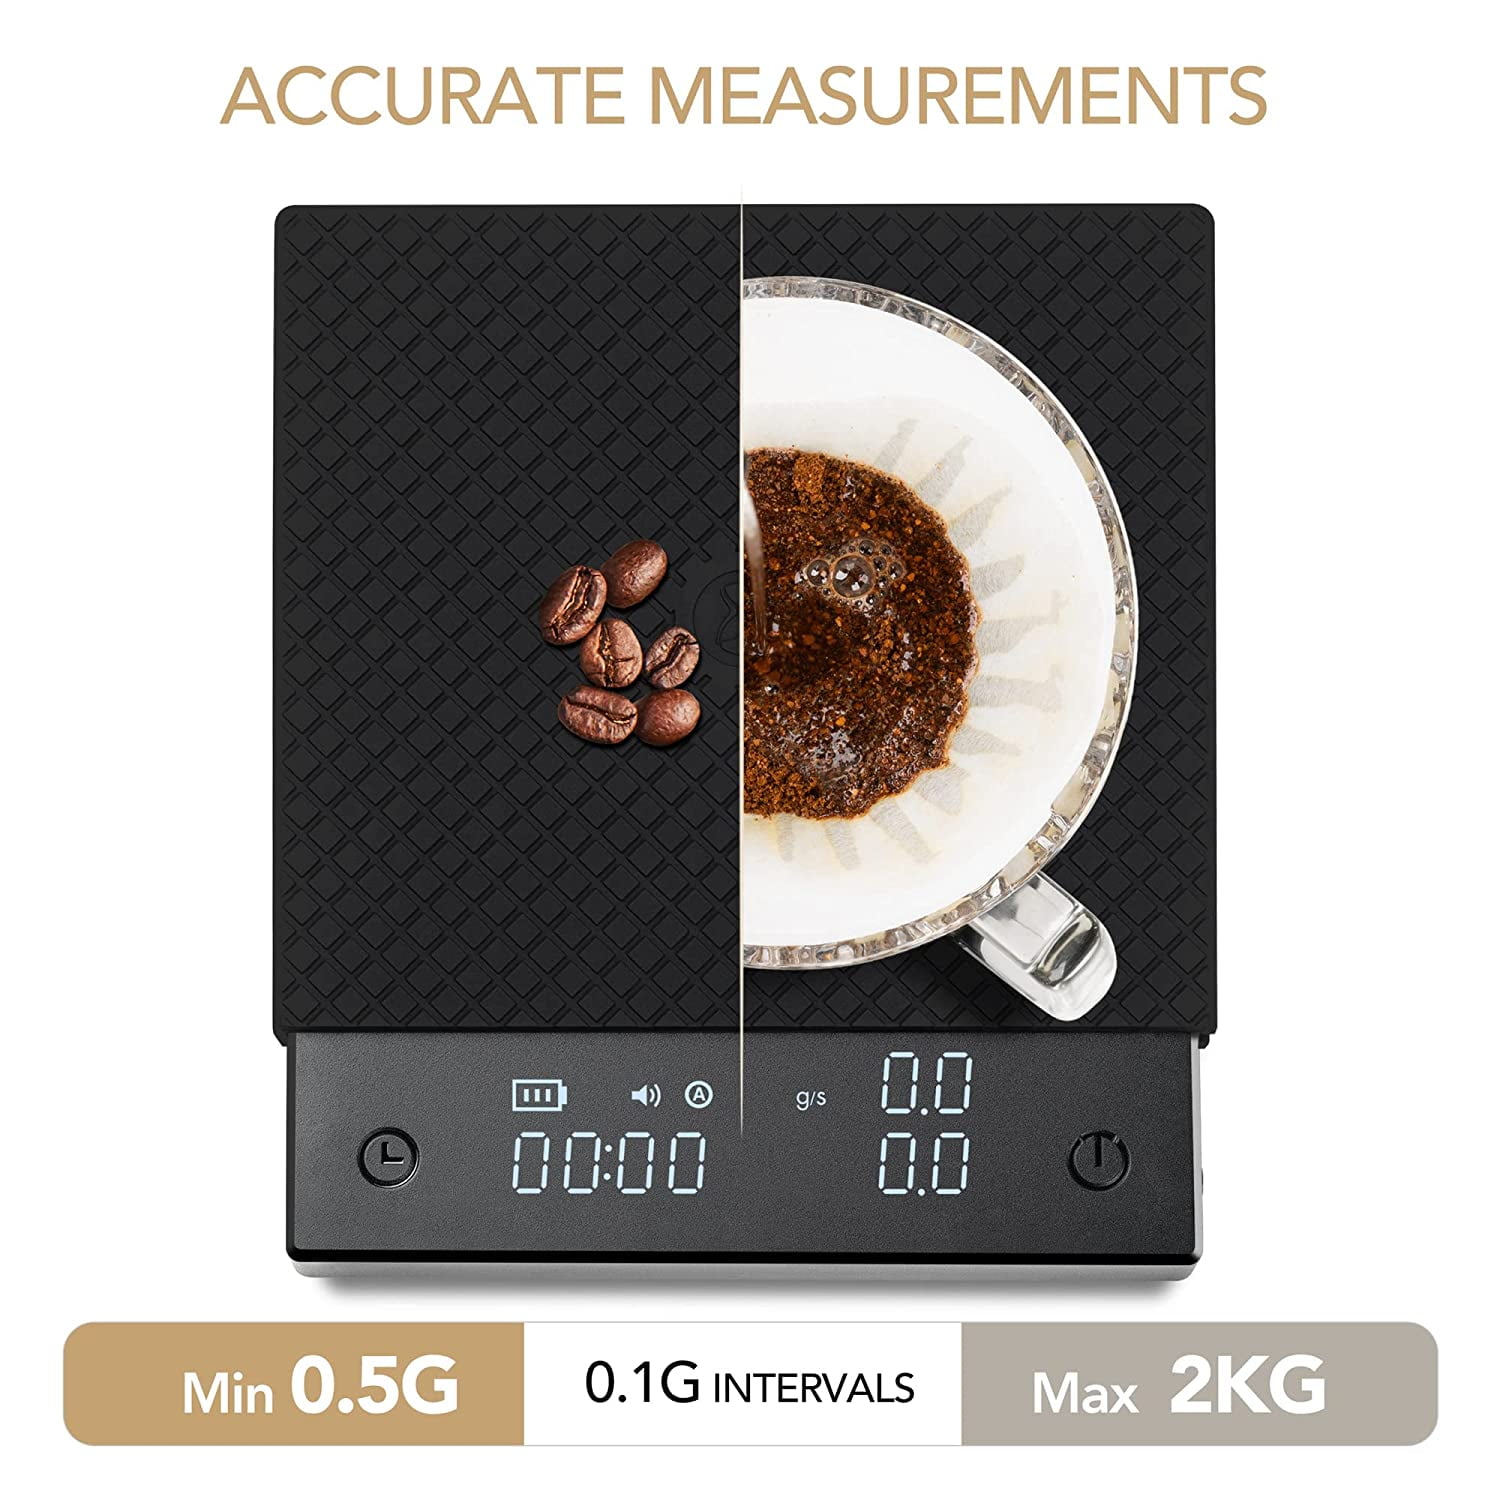 TIMEMORE Black Mirror Nano Coffee Scale, Mini Espresso Scale for Baking  Cooking Flow Measurement, Digital Food Scale Poor Over Hand Drip Scale